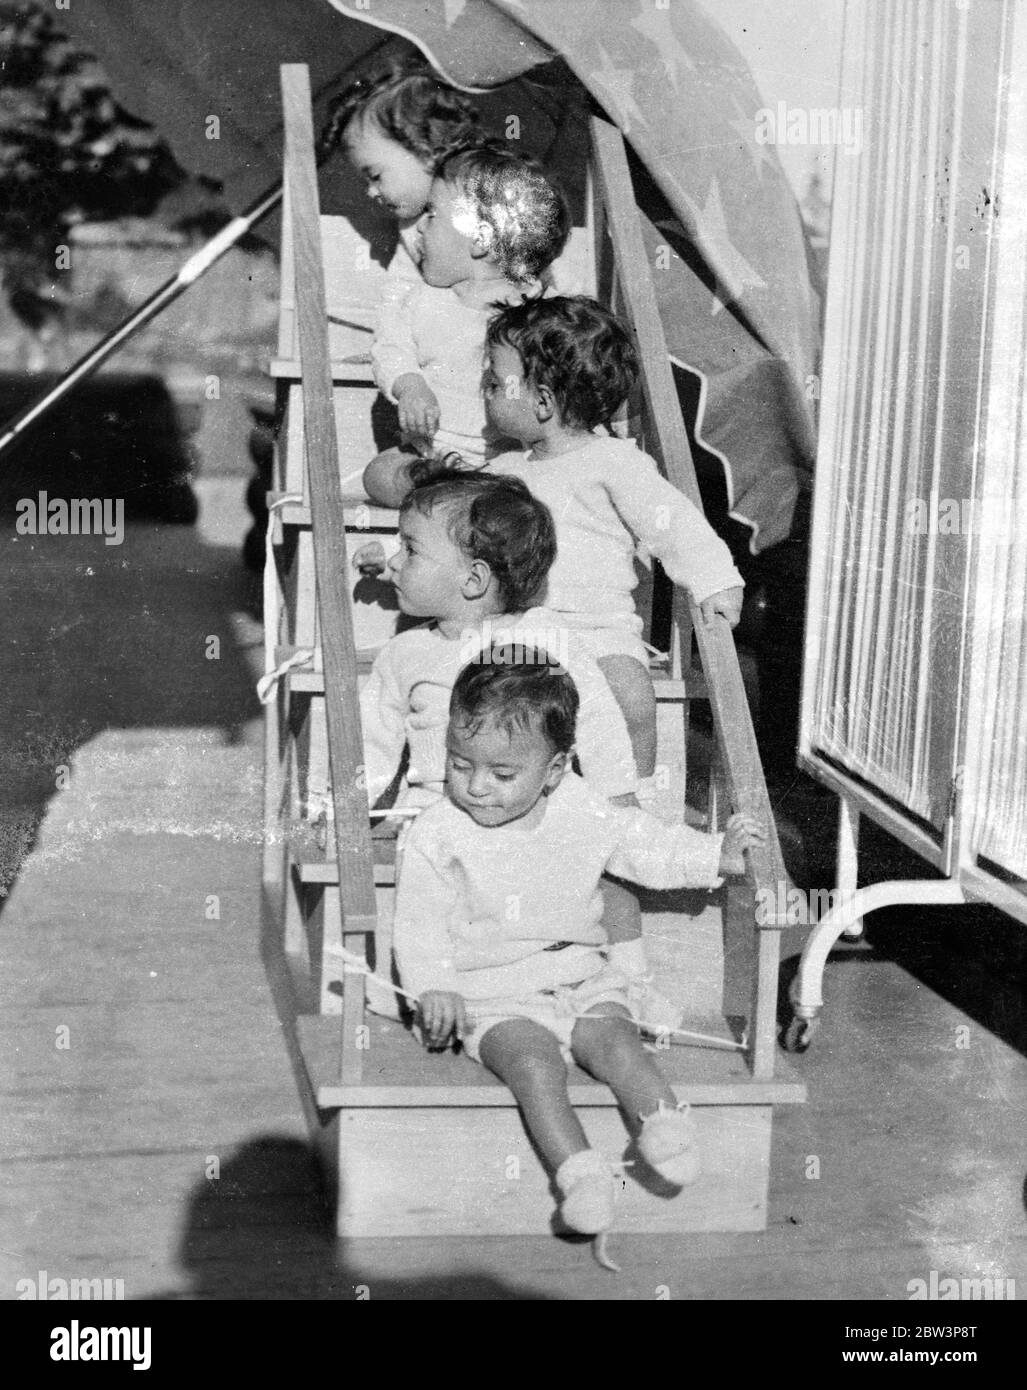 The quintuplets as perfect babies . The latest picture of the Dionne Quintuplets which shown how proper care and food have made them into perfect specimens of babyhood . The Quintuplets have now given their  support  to a fund designed to assist poor children all over America . In this picture , the Quins , carefully  roped  to their unusual perch , are imbibing the fresh air at their Callander ( Ontario ) home . From top to bottom - Yvonne , Annette , Cecile , Emilie and Marie . 22 December 1935 Stock Photo